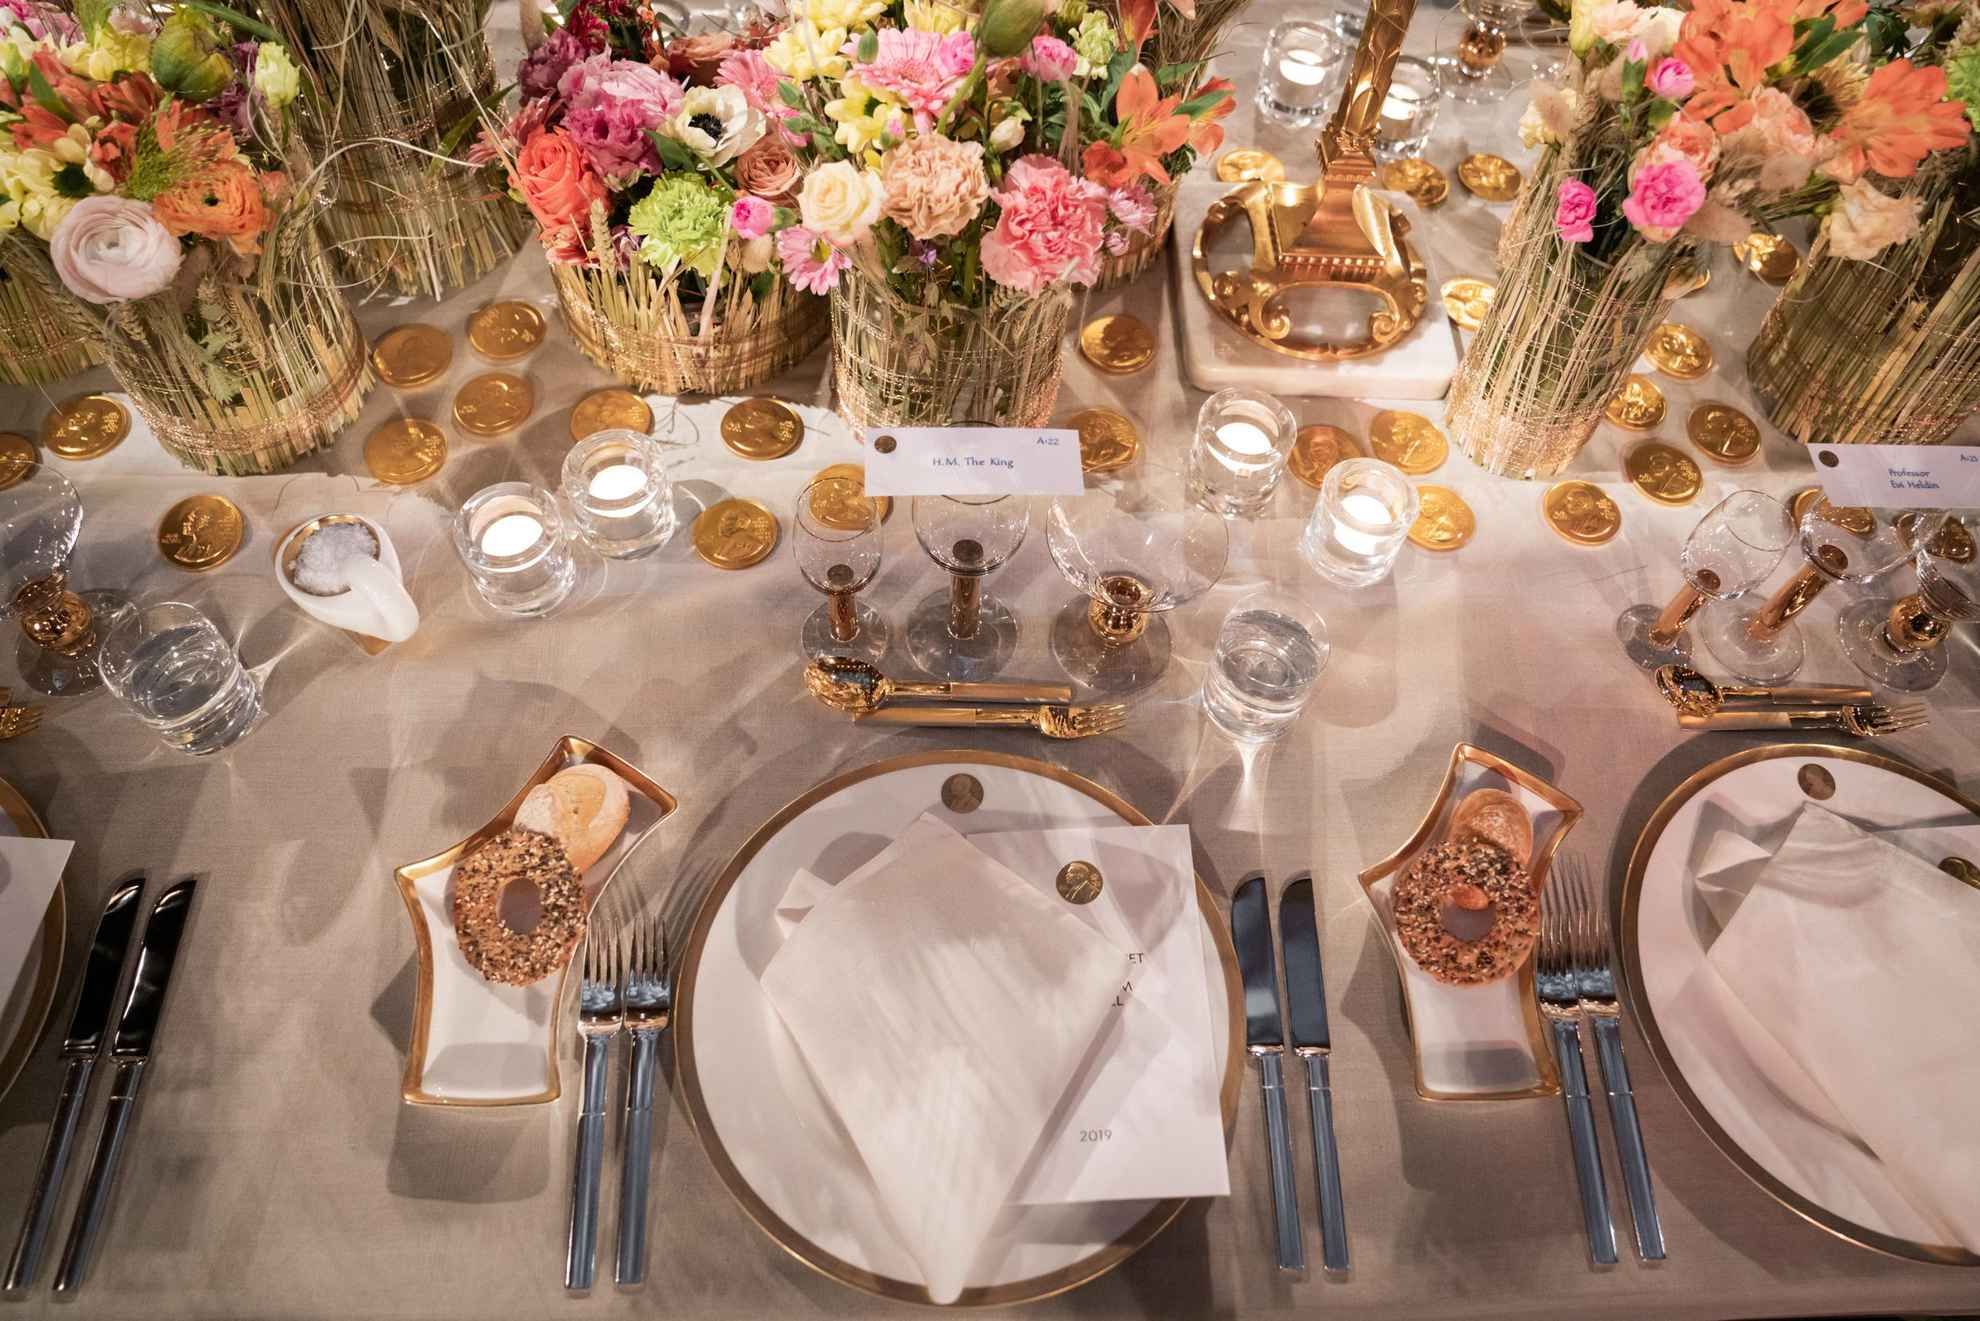 A tableware in white with golden details is set on a table with a white tablecloth. In the middle of the table are colorful flowers in vases.